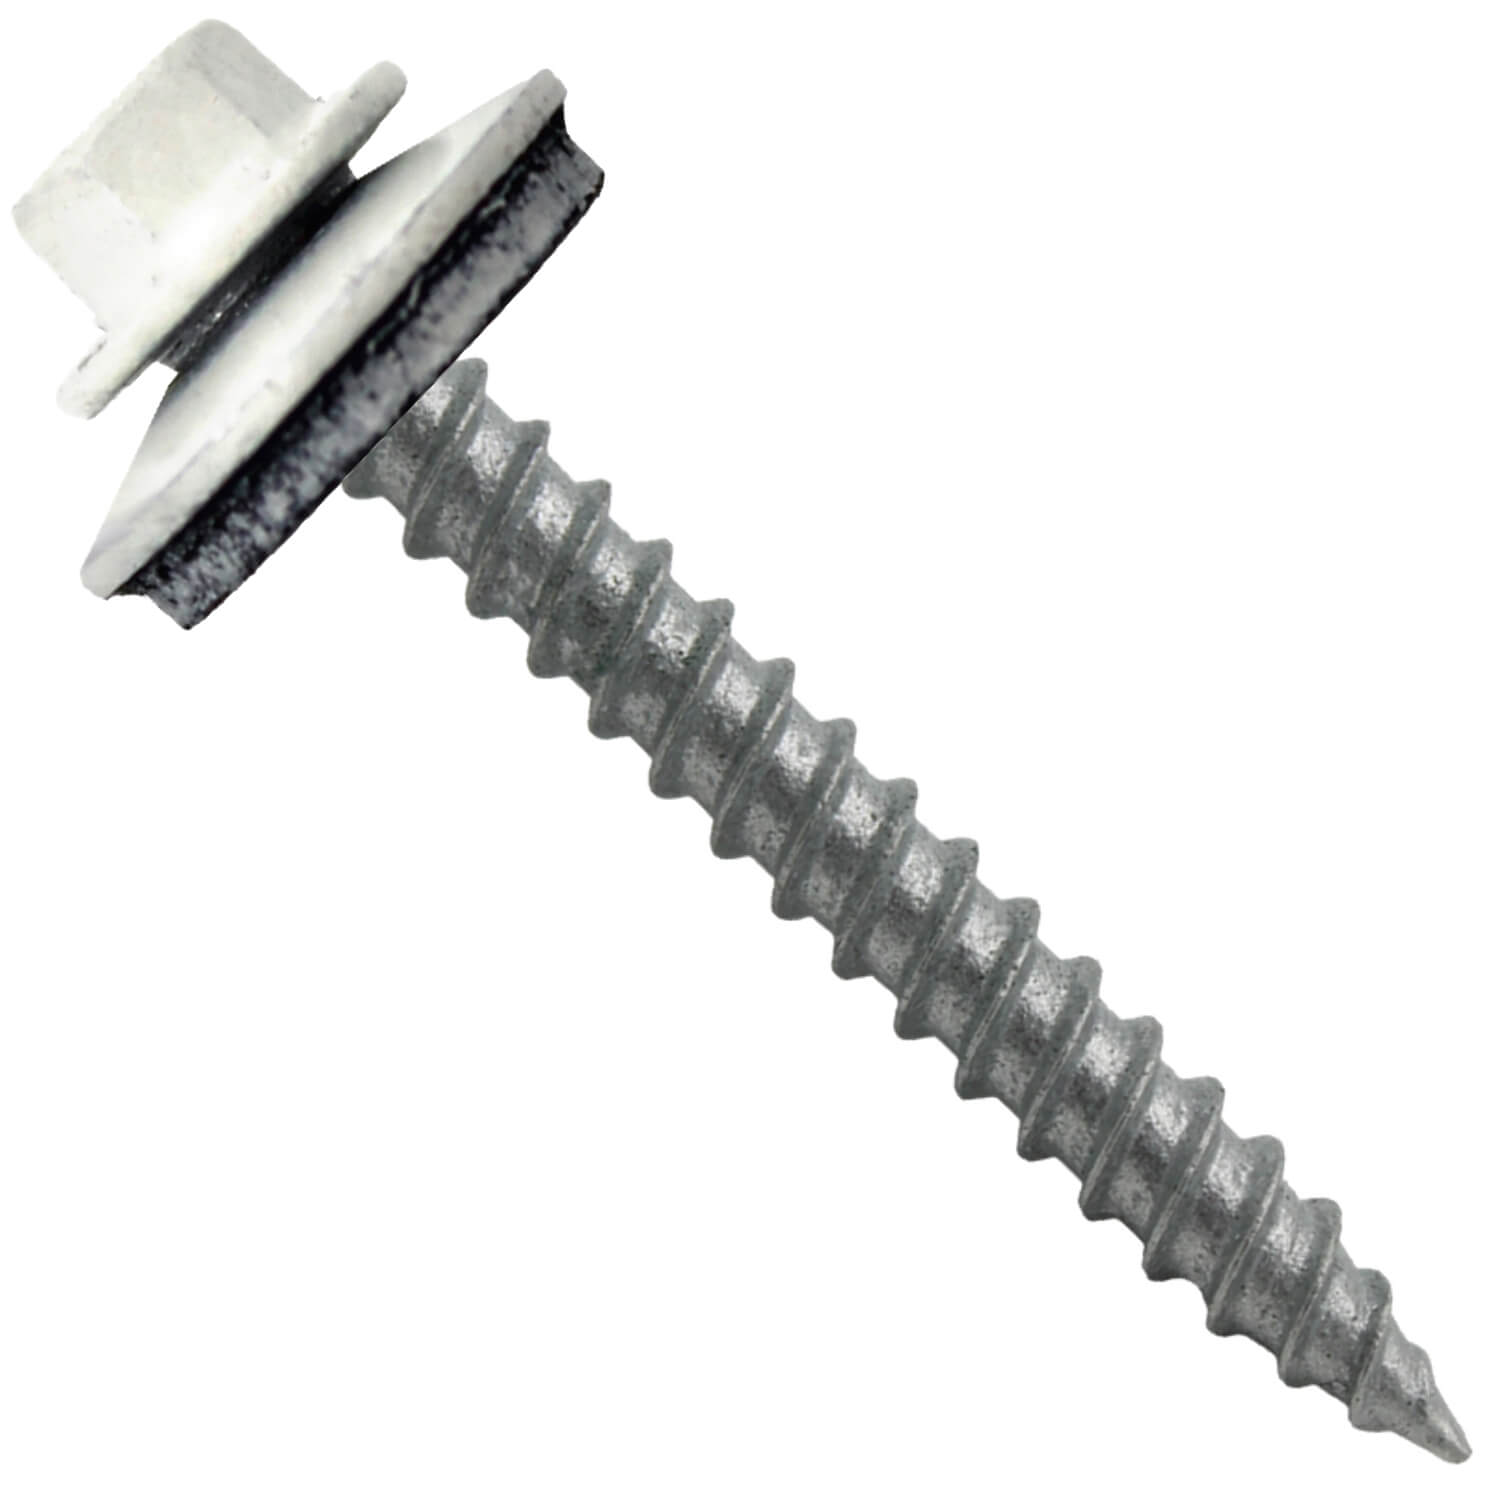 CORRUGATED ROOFING SCREWS & GREY STRAP CAPS FOR SHEET ROOFING * 2" 50 50mm 